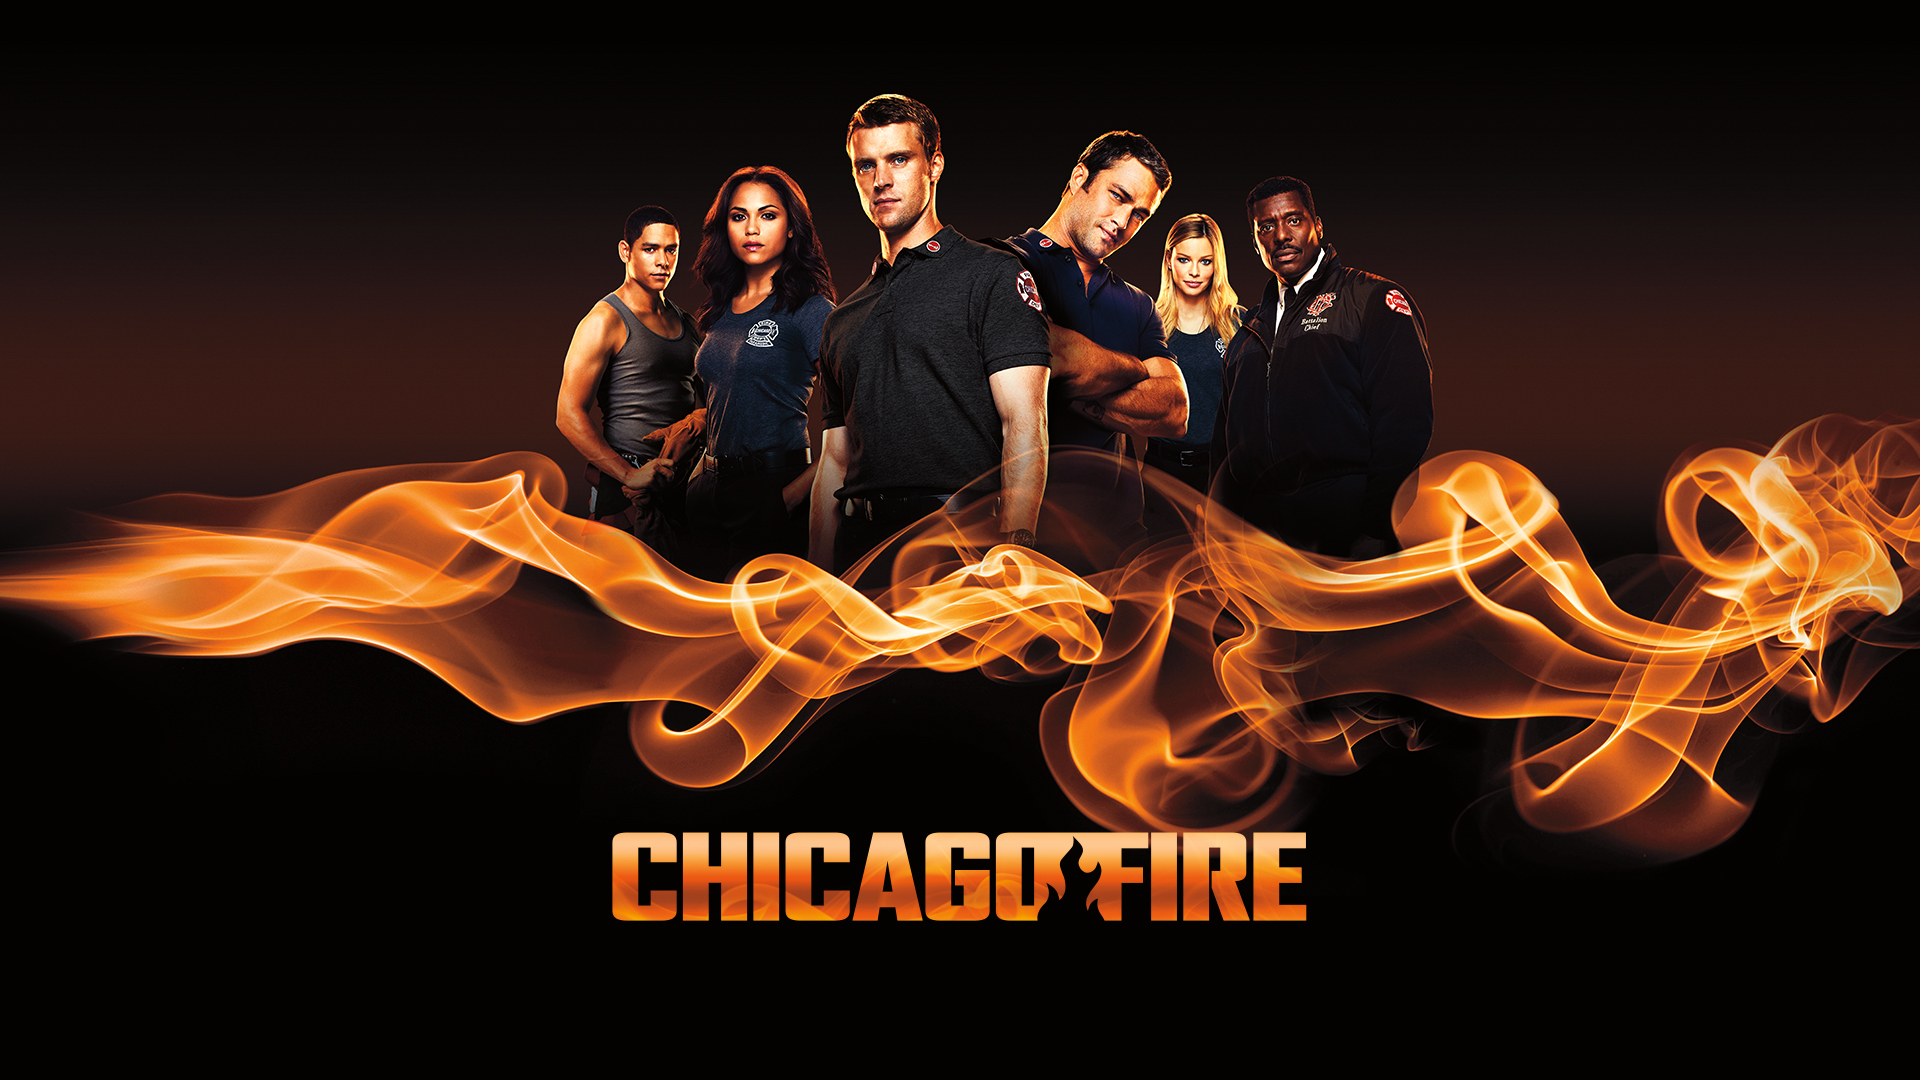 Chicago Fire Wallpapers - Wallpaper Cave.